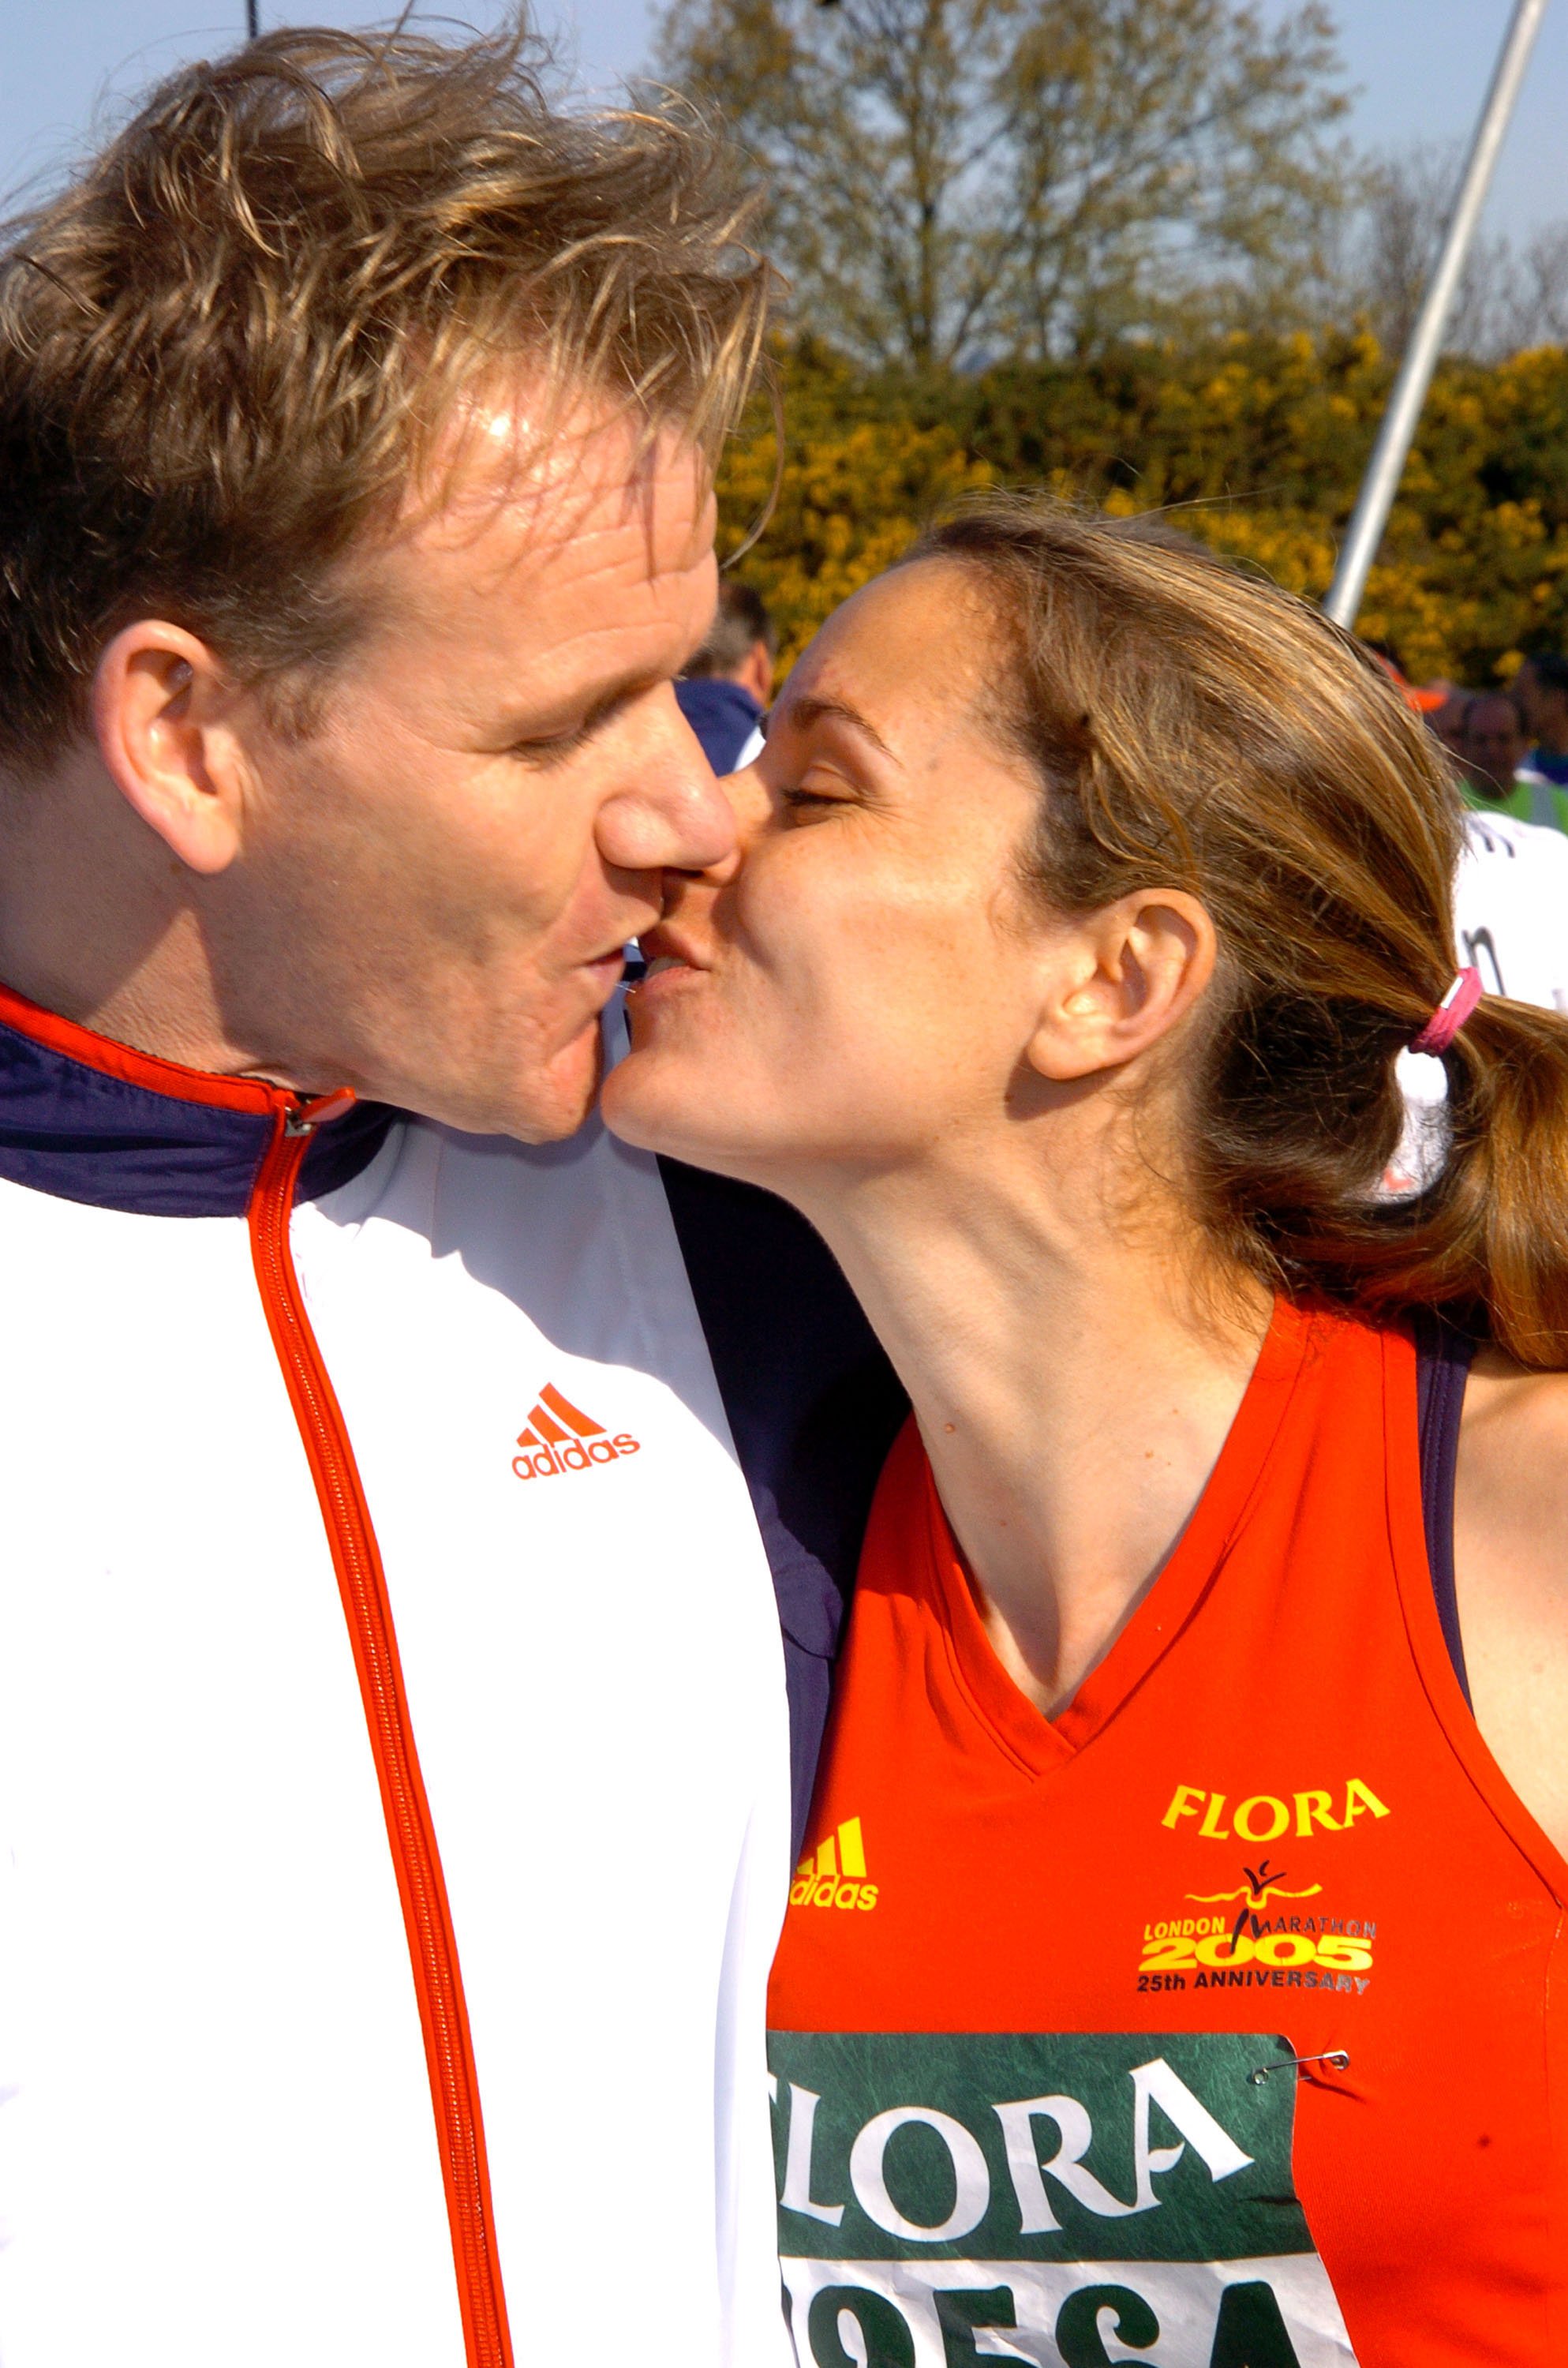 Gordon Ramsay and wife Tana Ramsay during 2005 Flora London Marathon at The Mall in London, Great Britain. | Source: Getty Images